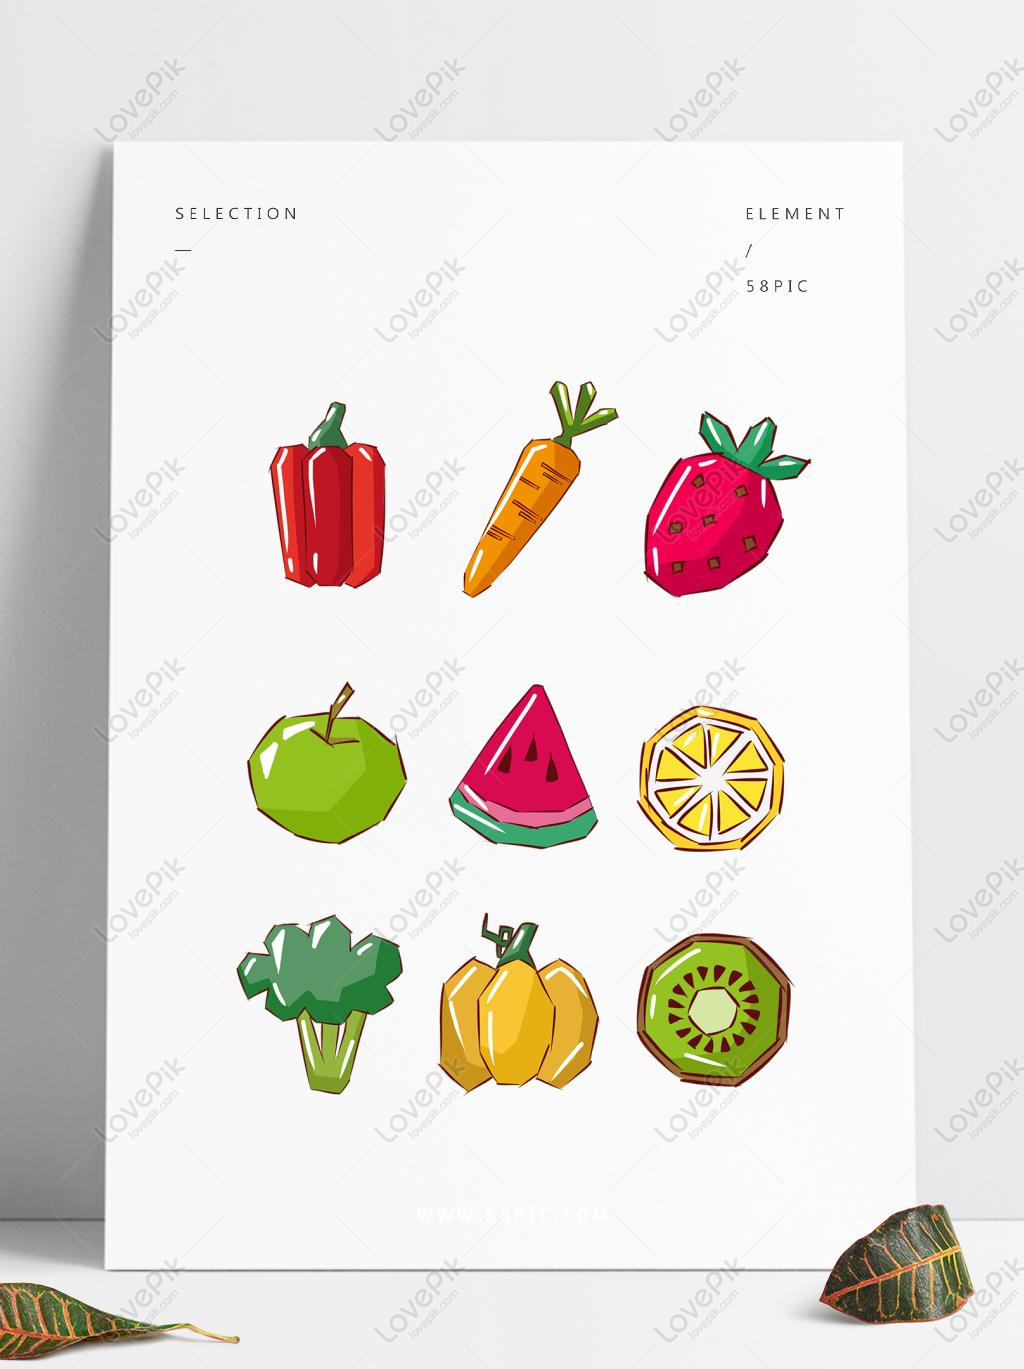 Where Your Treasure Is: DIY Fruit and Vegetable Prints